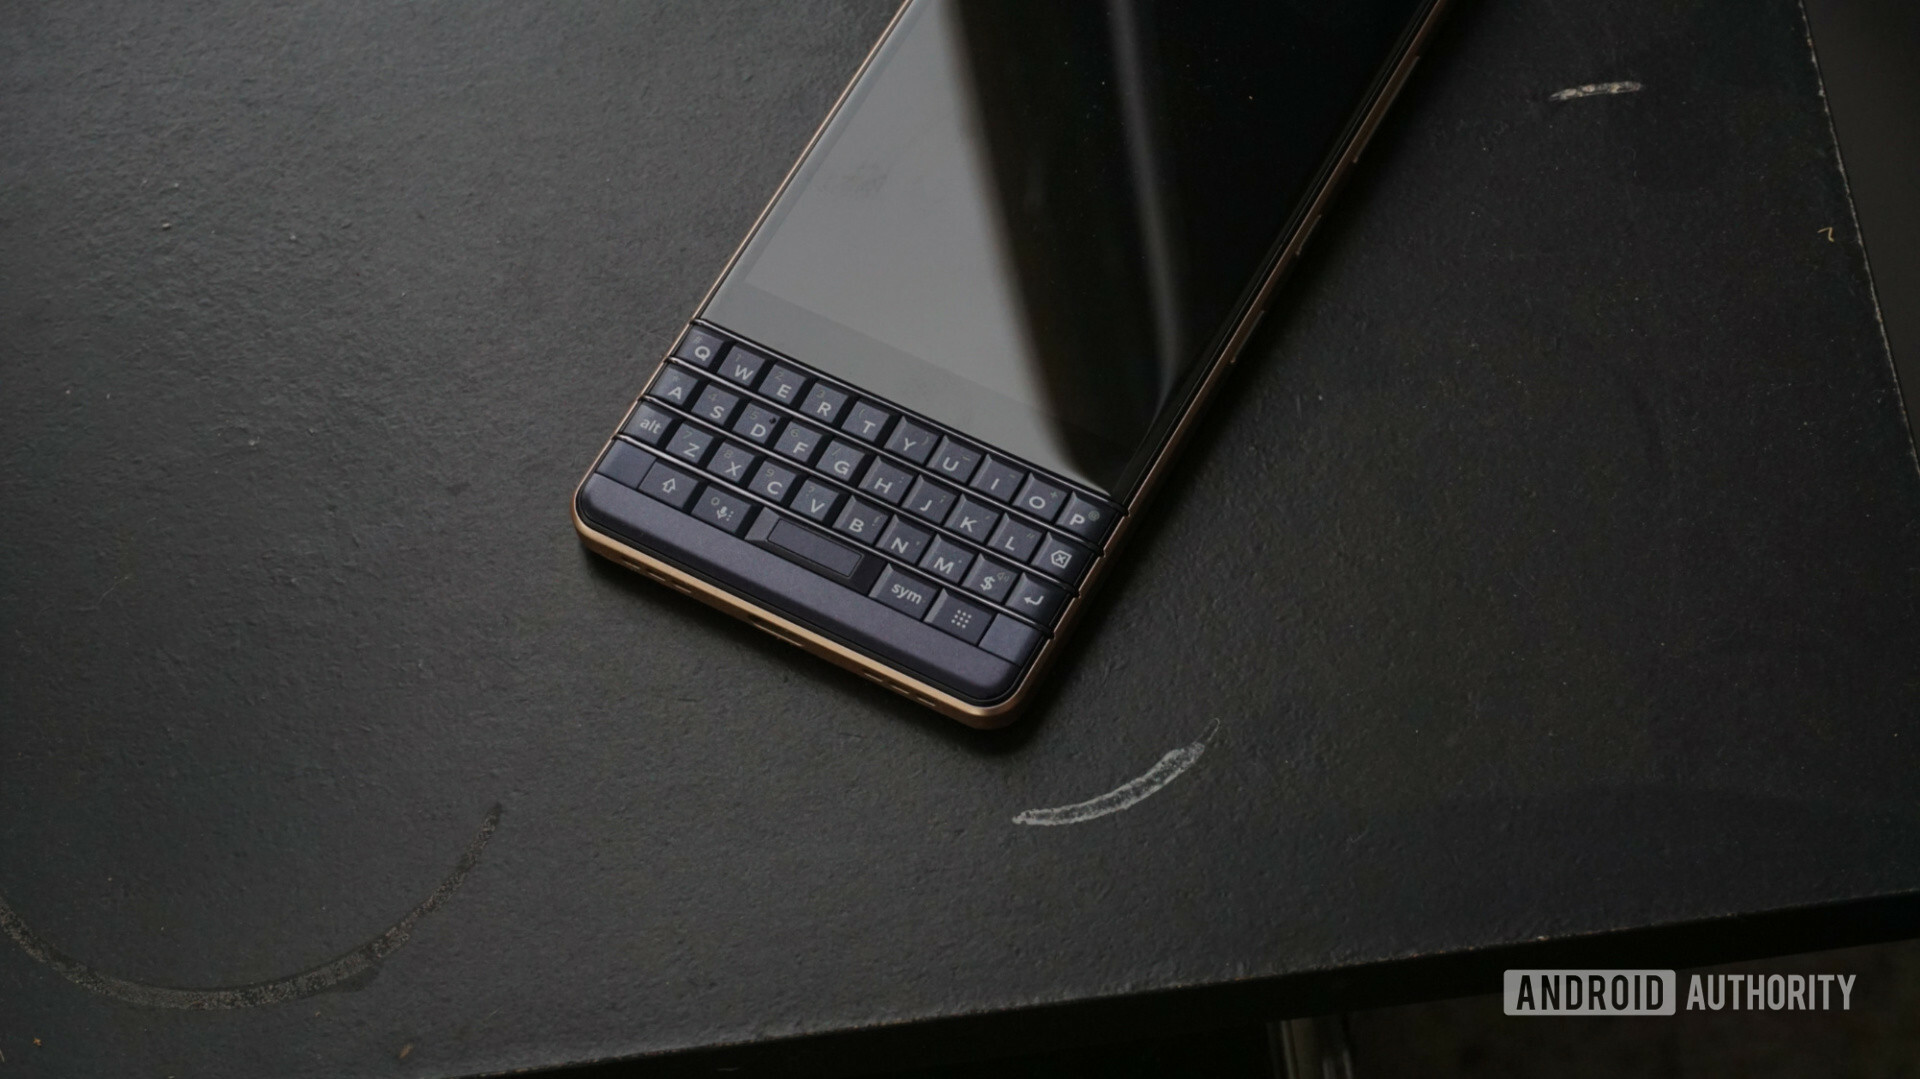 BlackBerry Key2 LE - The best phones with a keyboard